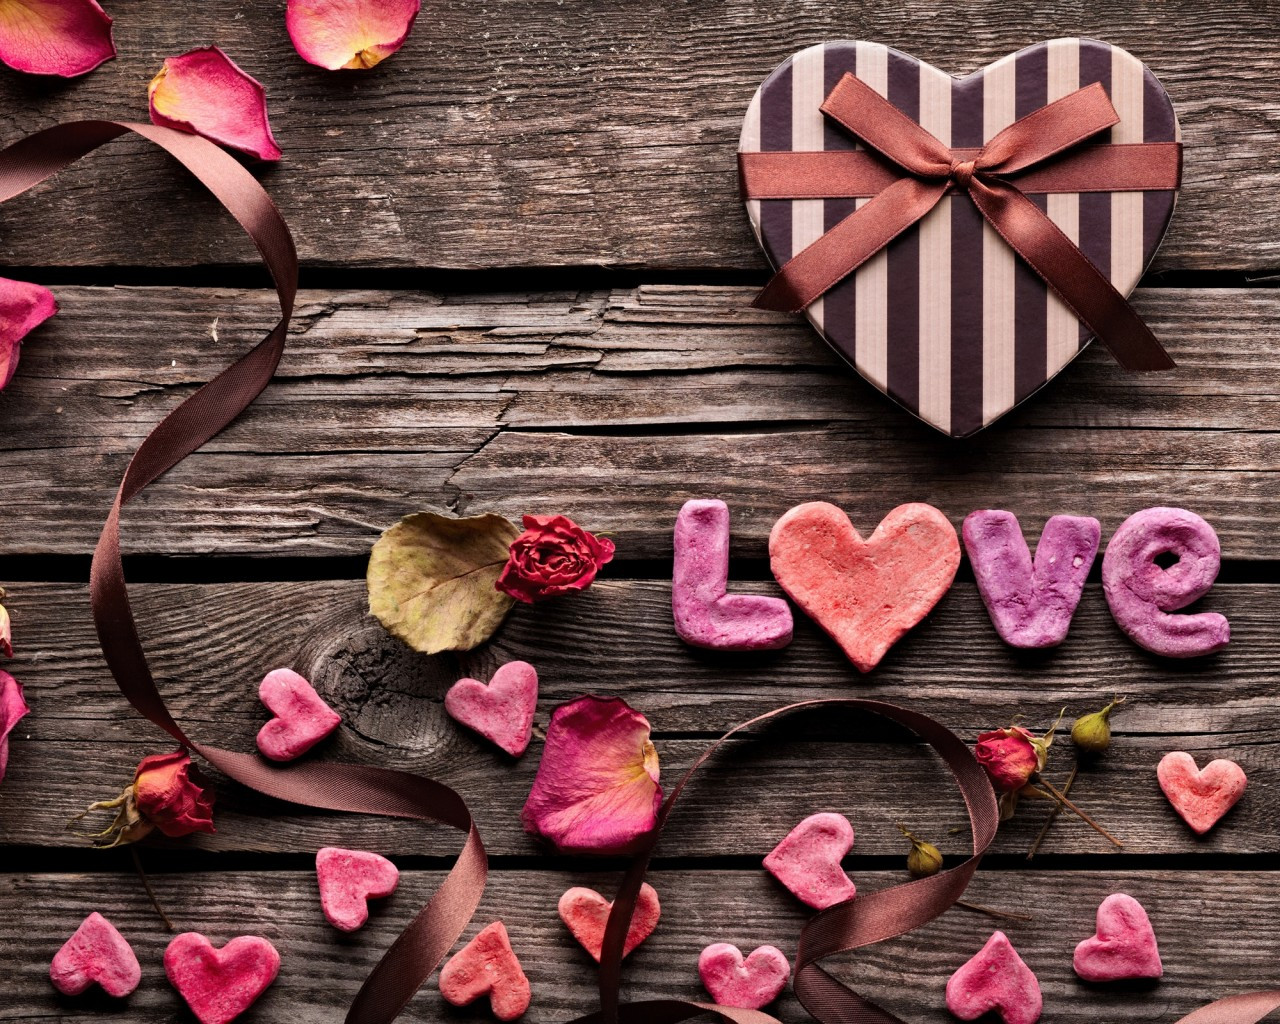 Download 1280x1024 Valentine's Day, Love, Wood, Heart, Leaves, Petals, Romance Wallpaper